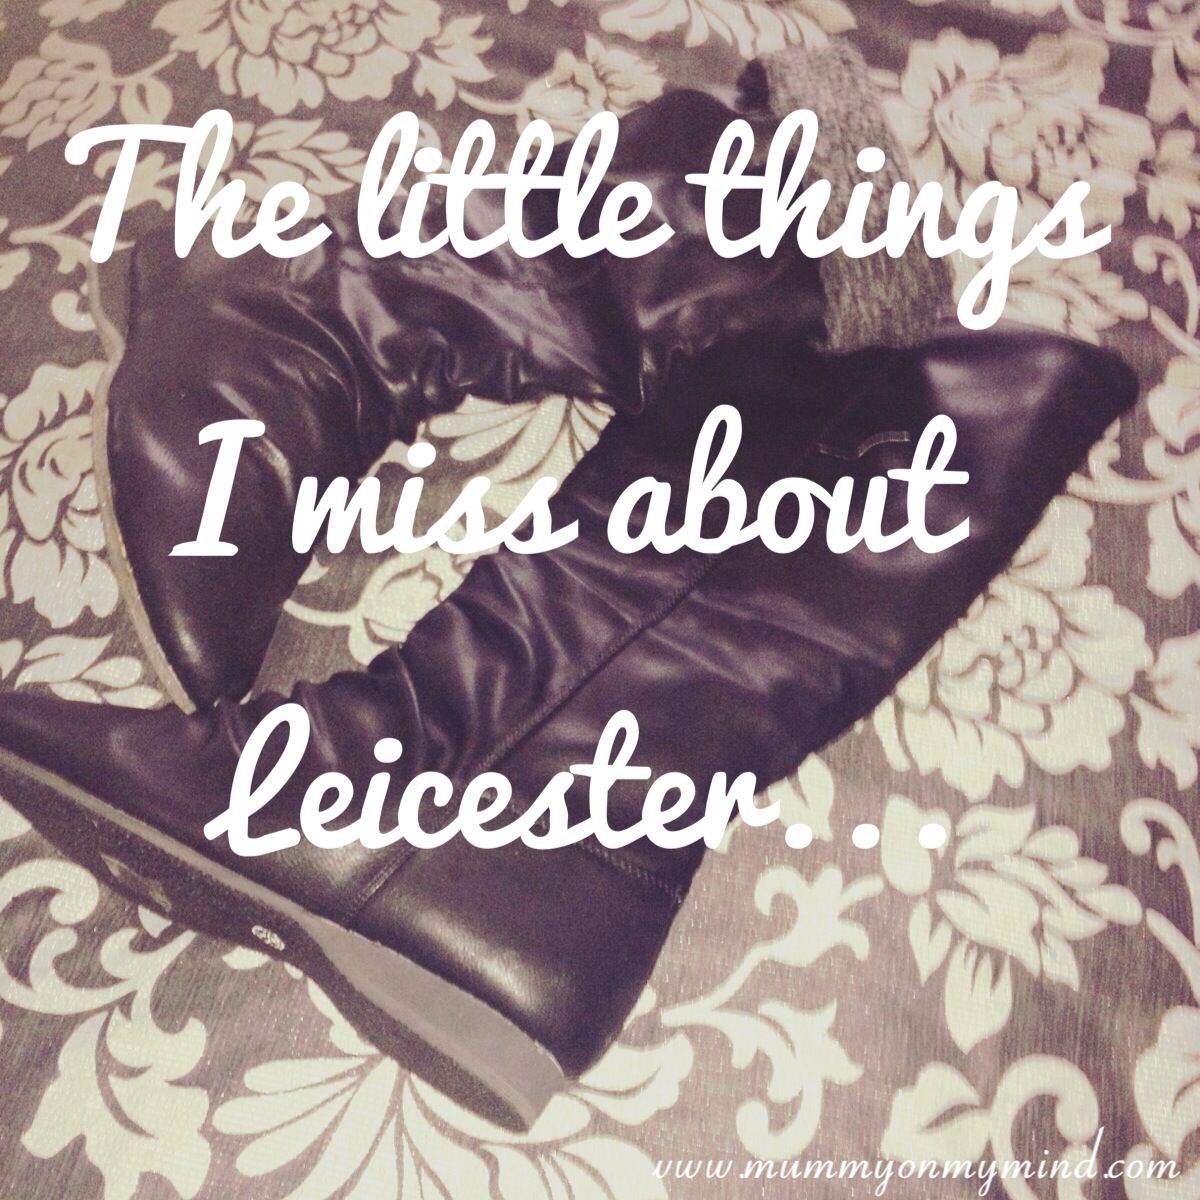 The little things I miss about Leicester…